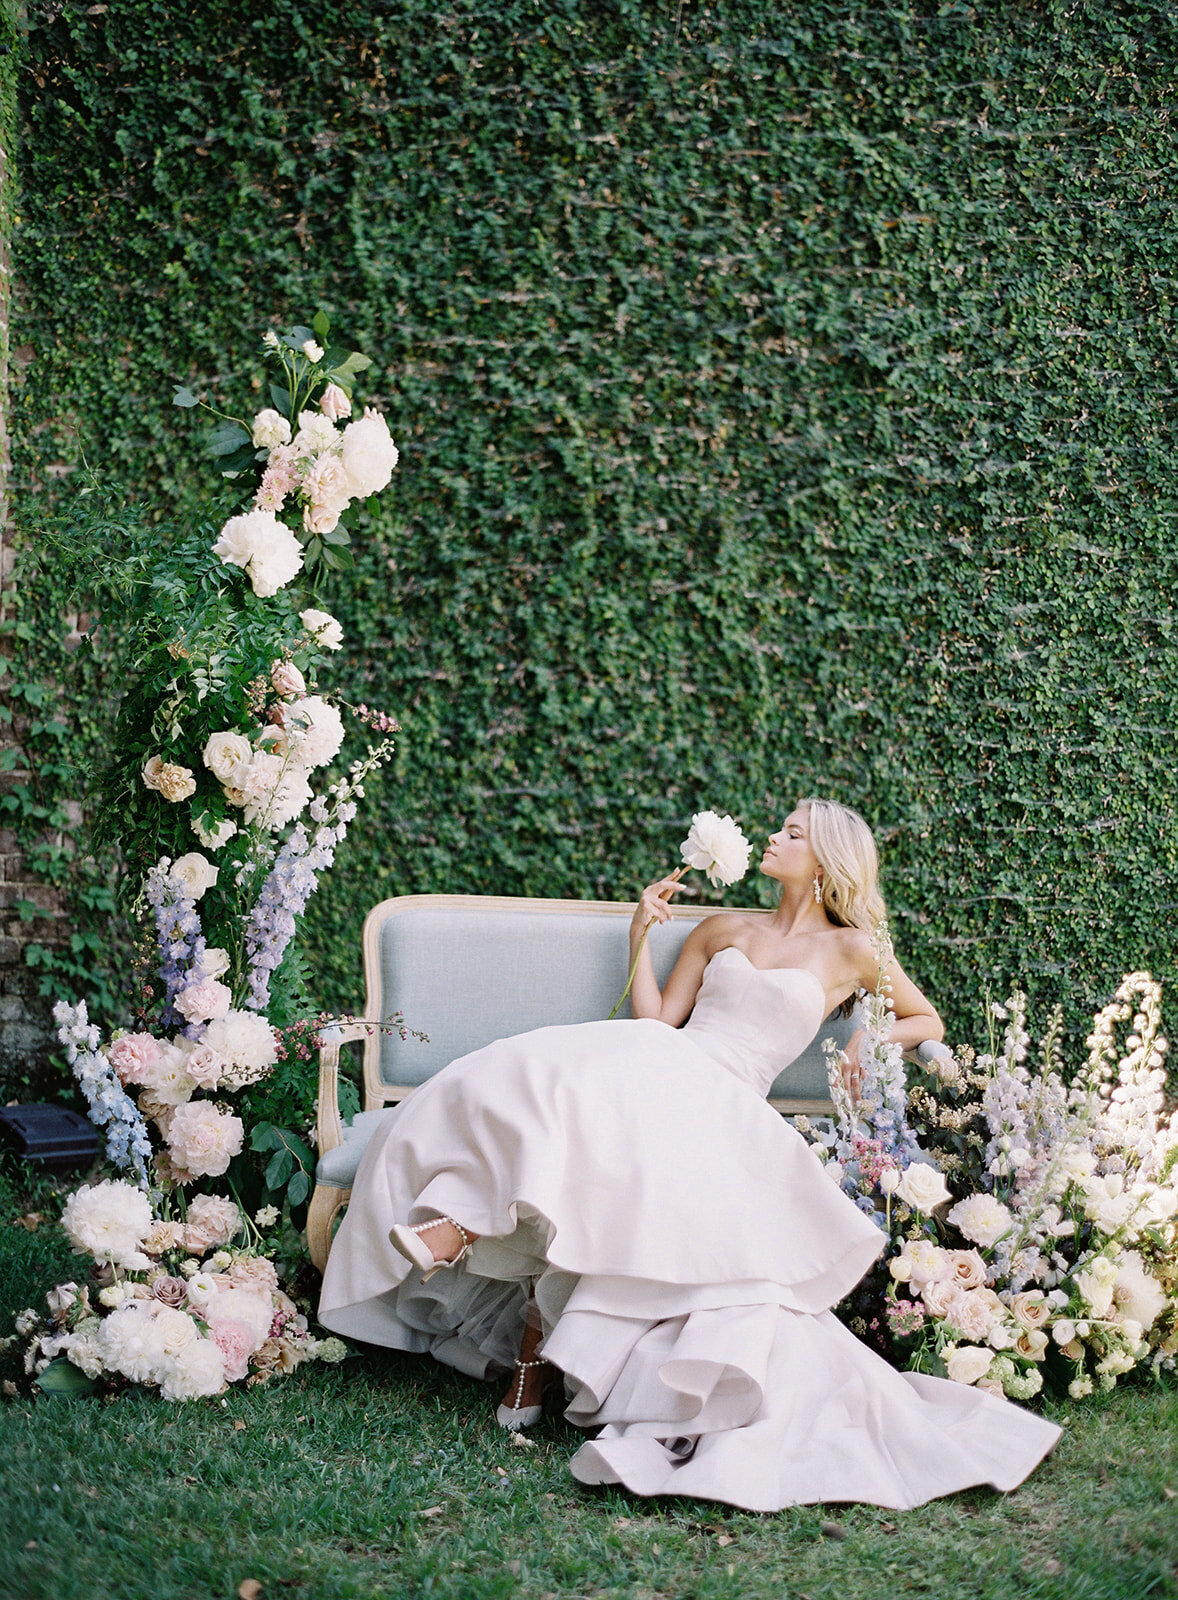 Middleton Place Wedding. Bride on a vintage blue couch in front of a wall of ivy, florals all around her. Bride is in a strapless ivory wedding gown with fitted bodice and flowing train designed by  Anne Barge. Bride has legs crossed and her Bella Belle Shoes ivory heels with pearls showing. She is leaning back holding a delilah flower and smelling it. Photographed by wedding photographers in Charleston Amy Mulder Photography